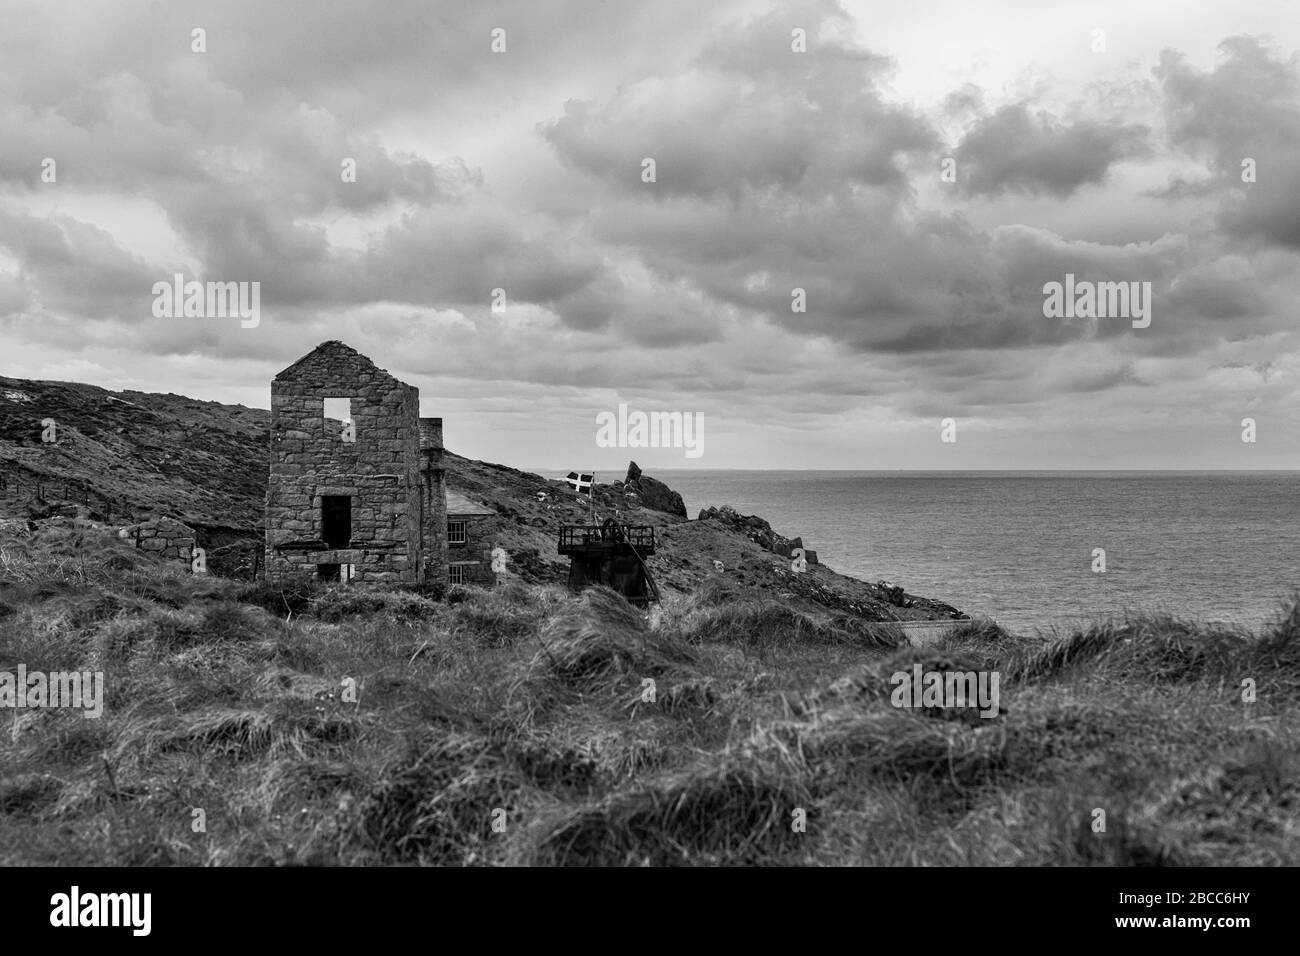 Ruins of the pump engine house, Levant Mine, UNESCO World Heritage Site, Penwith Peninsula, Cornwall, UK.  Black and white version Stock Photo